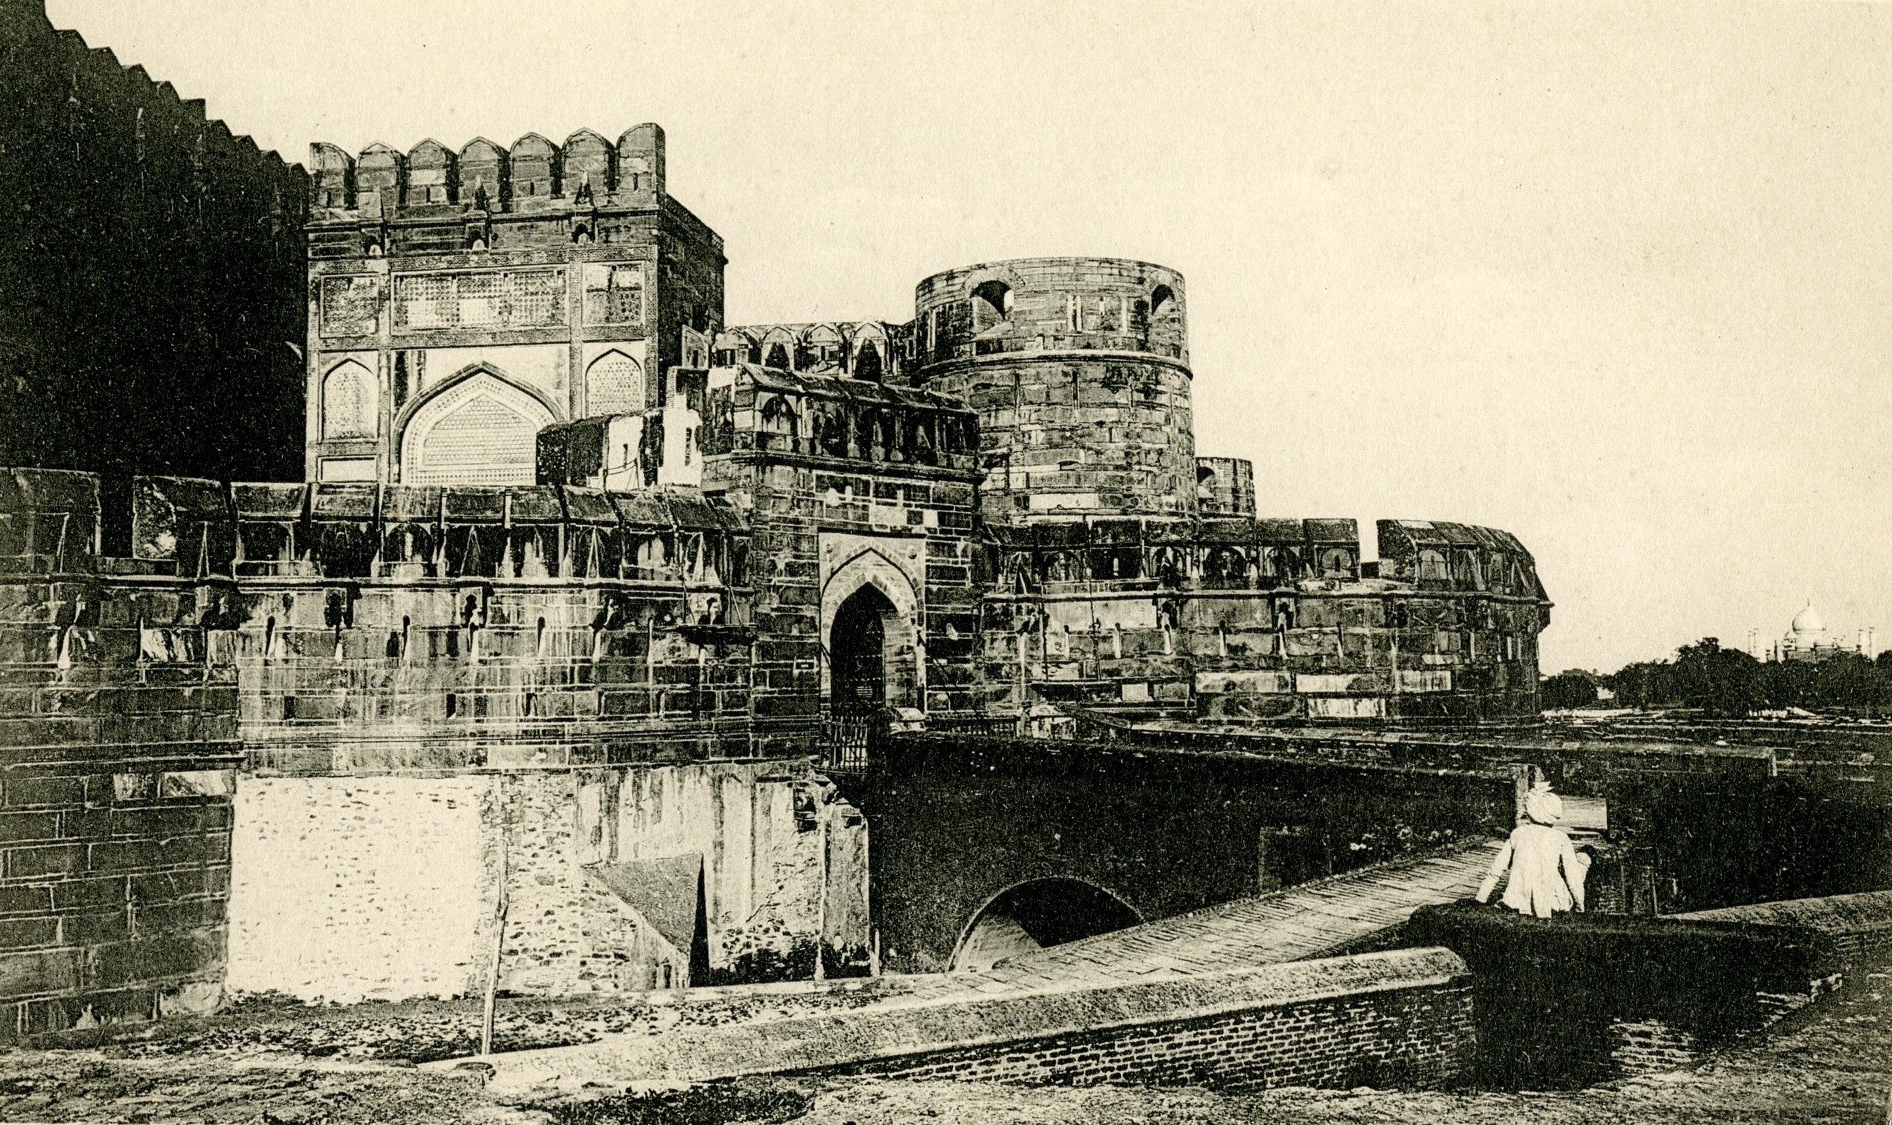 The Amar Singh Gate, From a Collection of Postcards by Walter George Whitman, 1920s. Image Source: Flickr